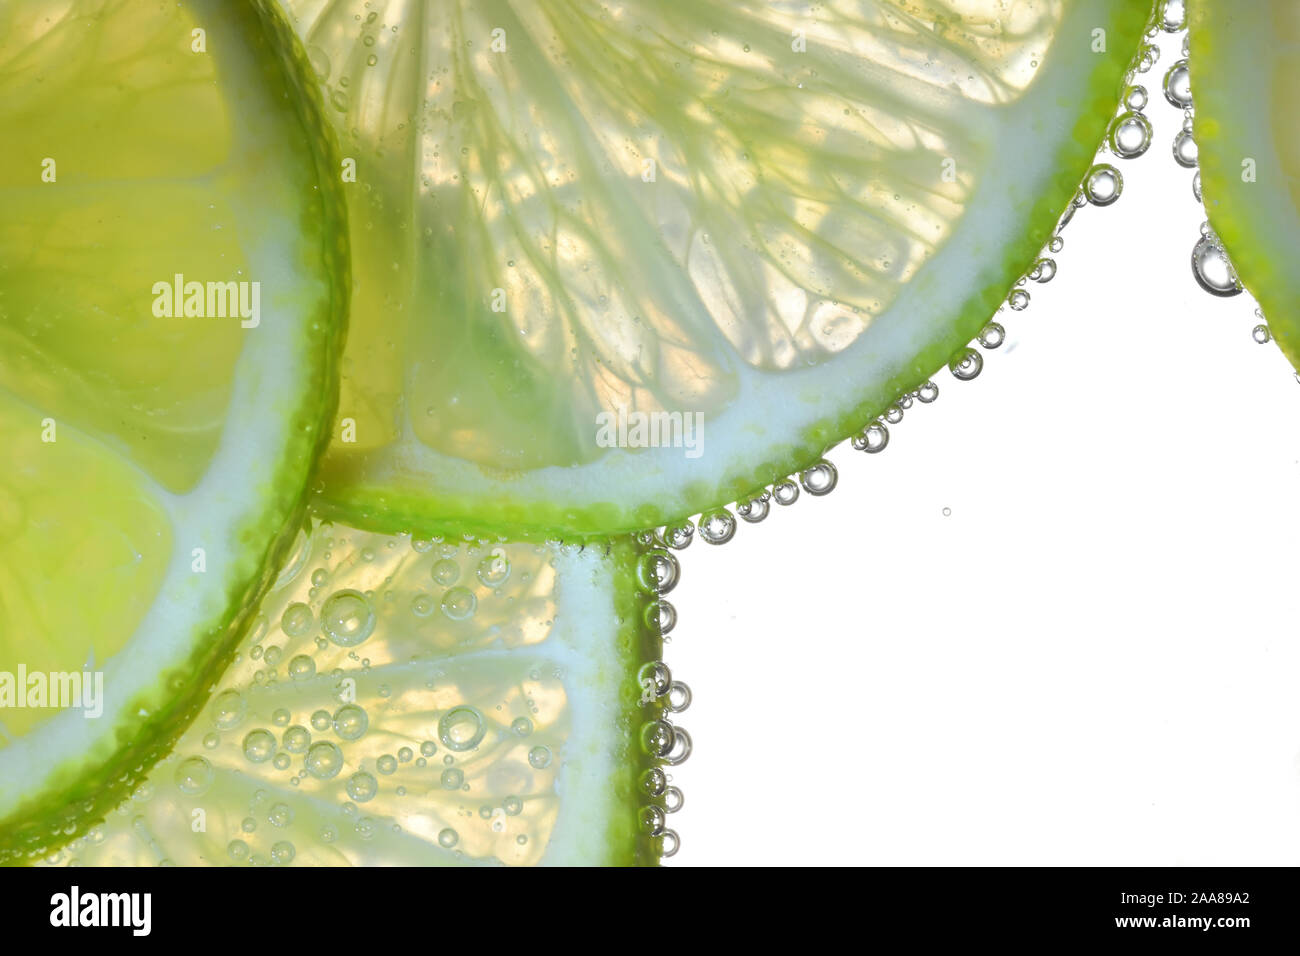 Lemon Slices In Water With Air Bubbles Stock Photo